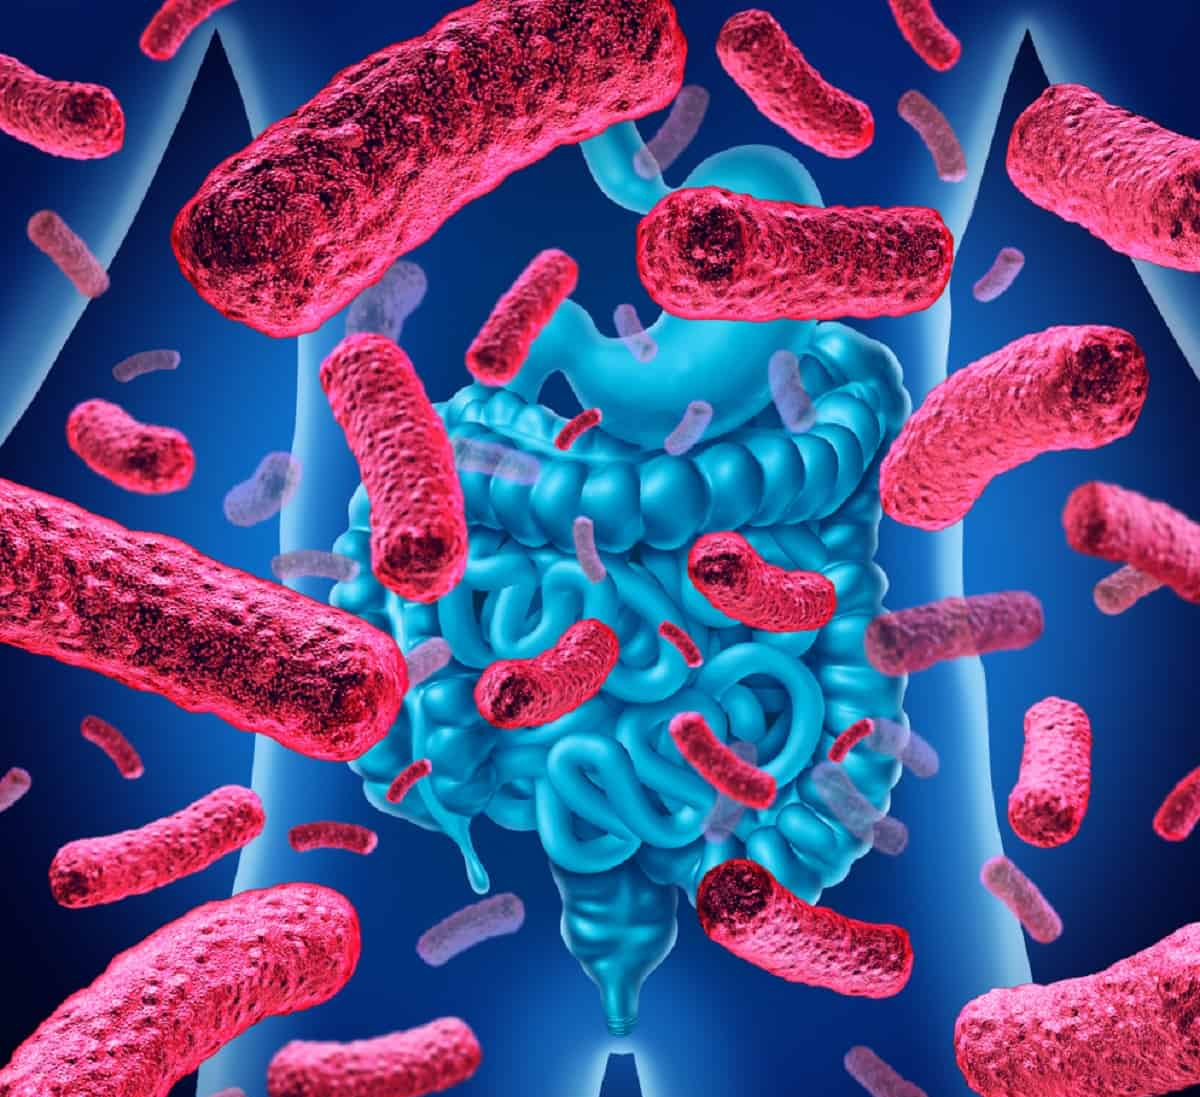 Dysbacteriosis: what can be confused with